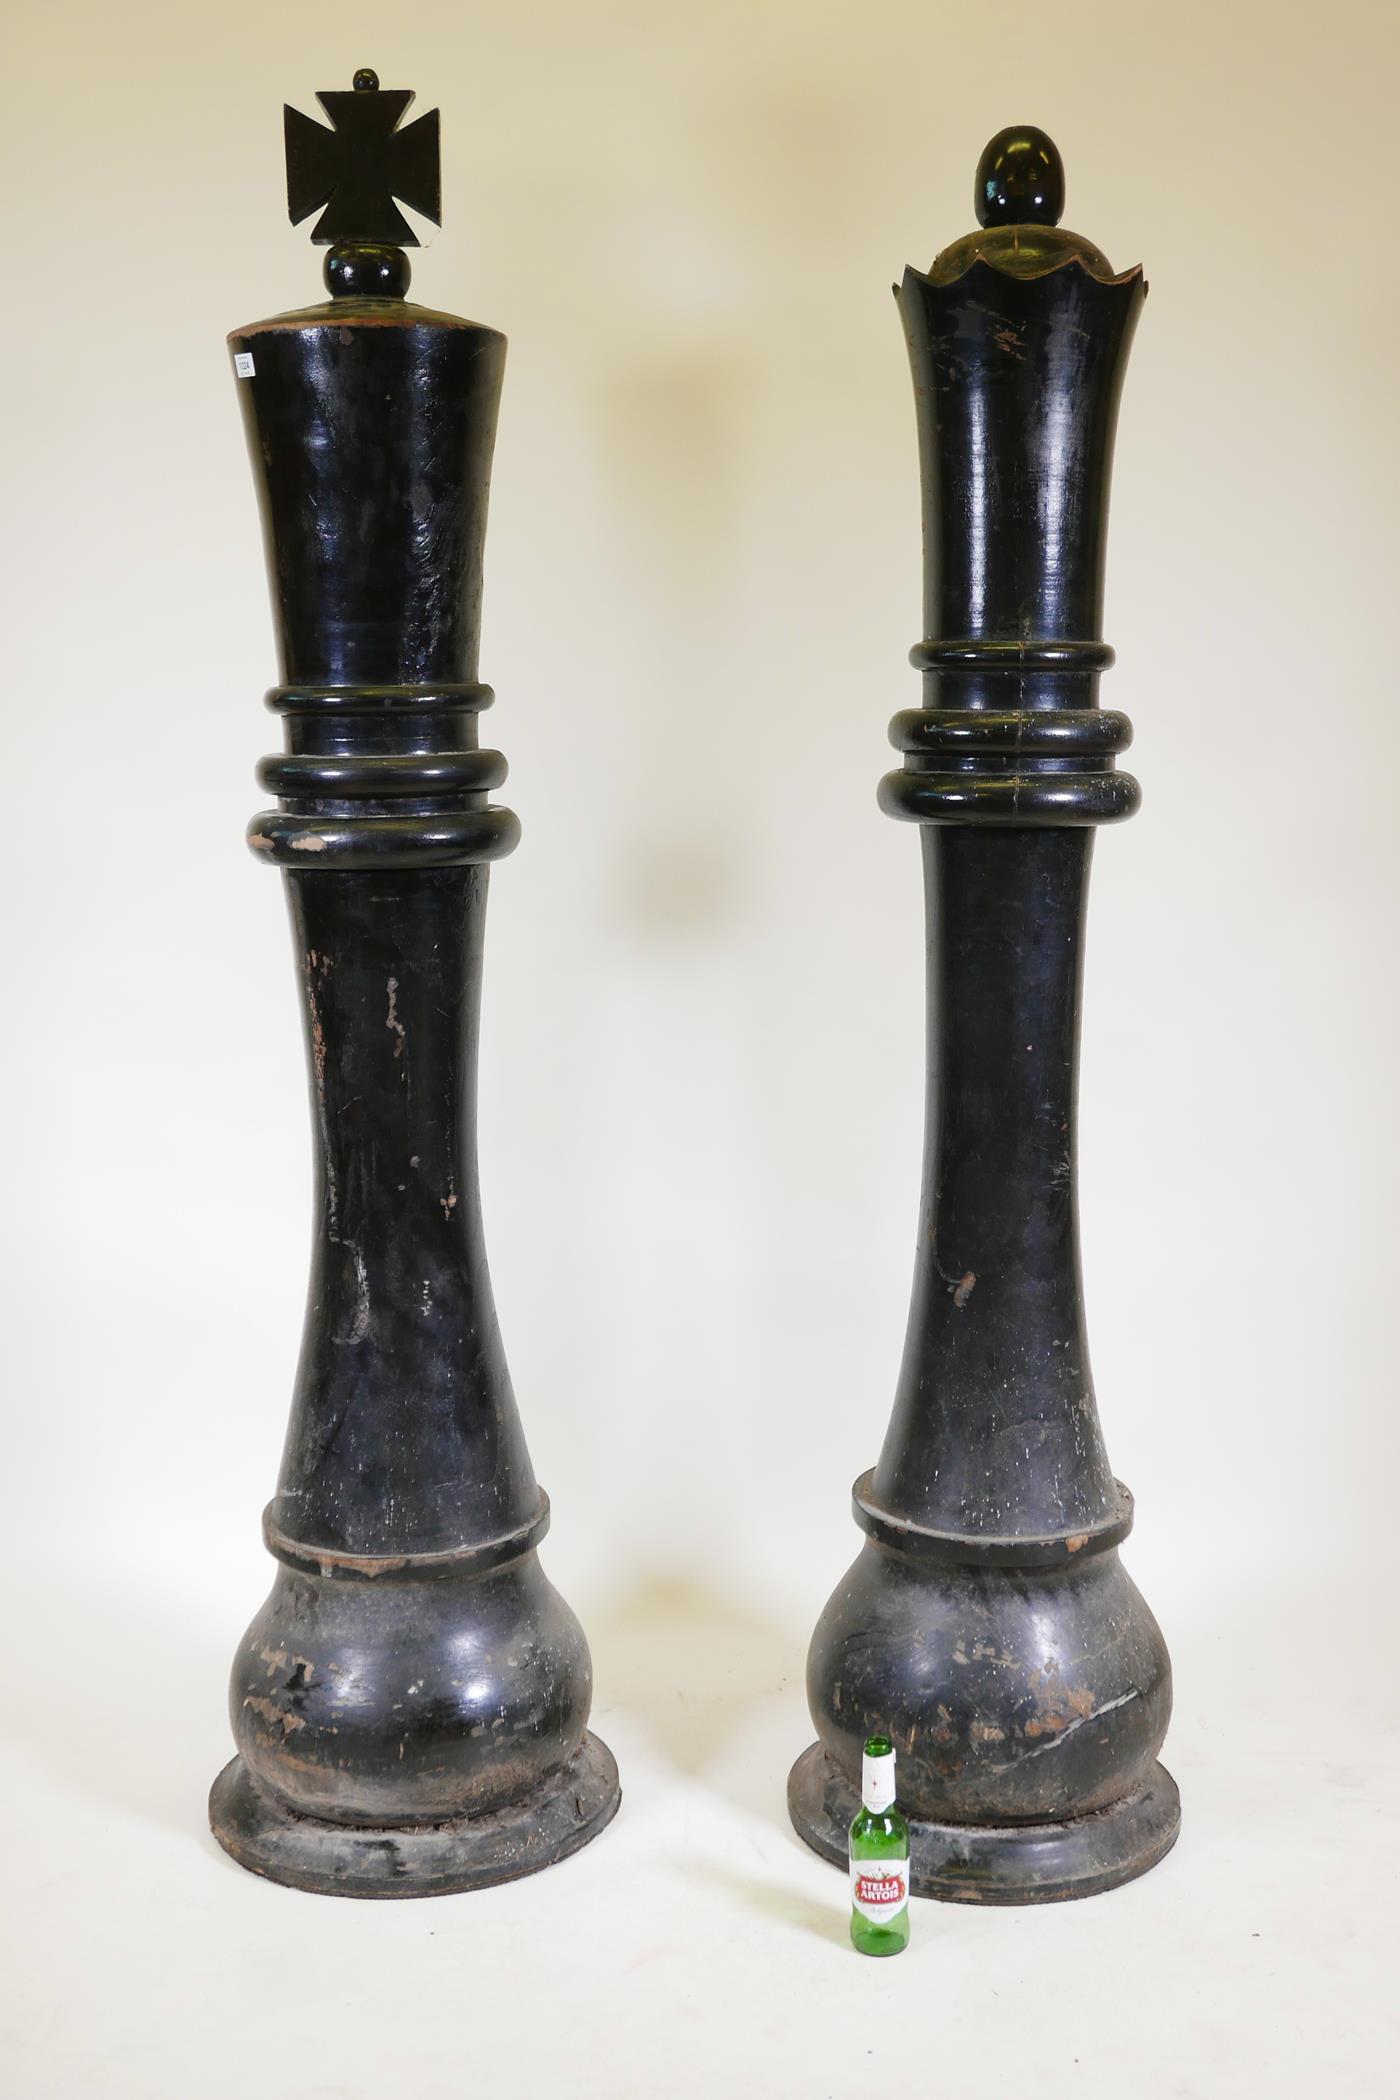 A pair of giant 'King and Queen' chess pieces, 72" high - Image 3 of 3